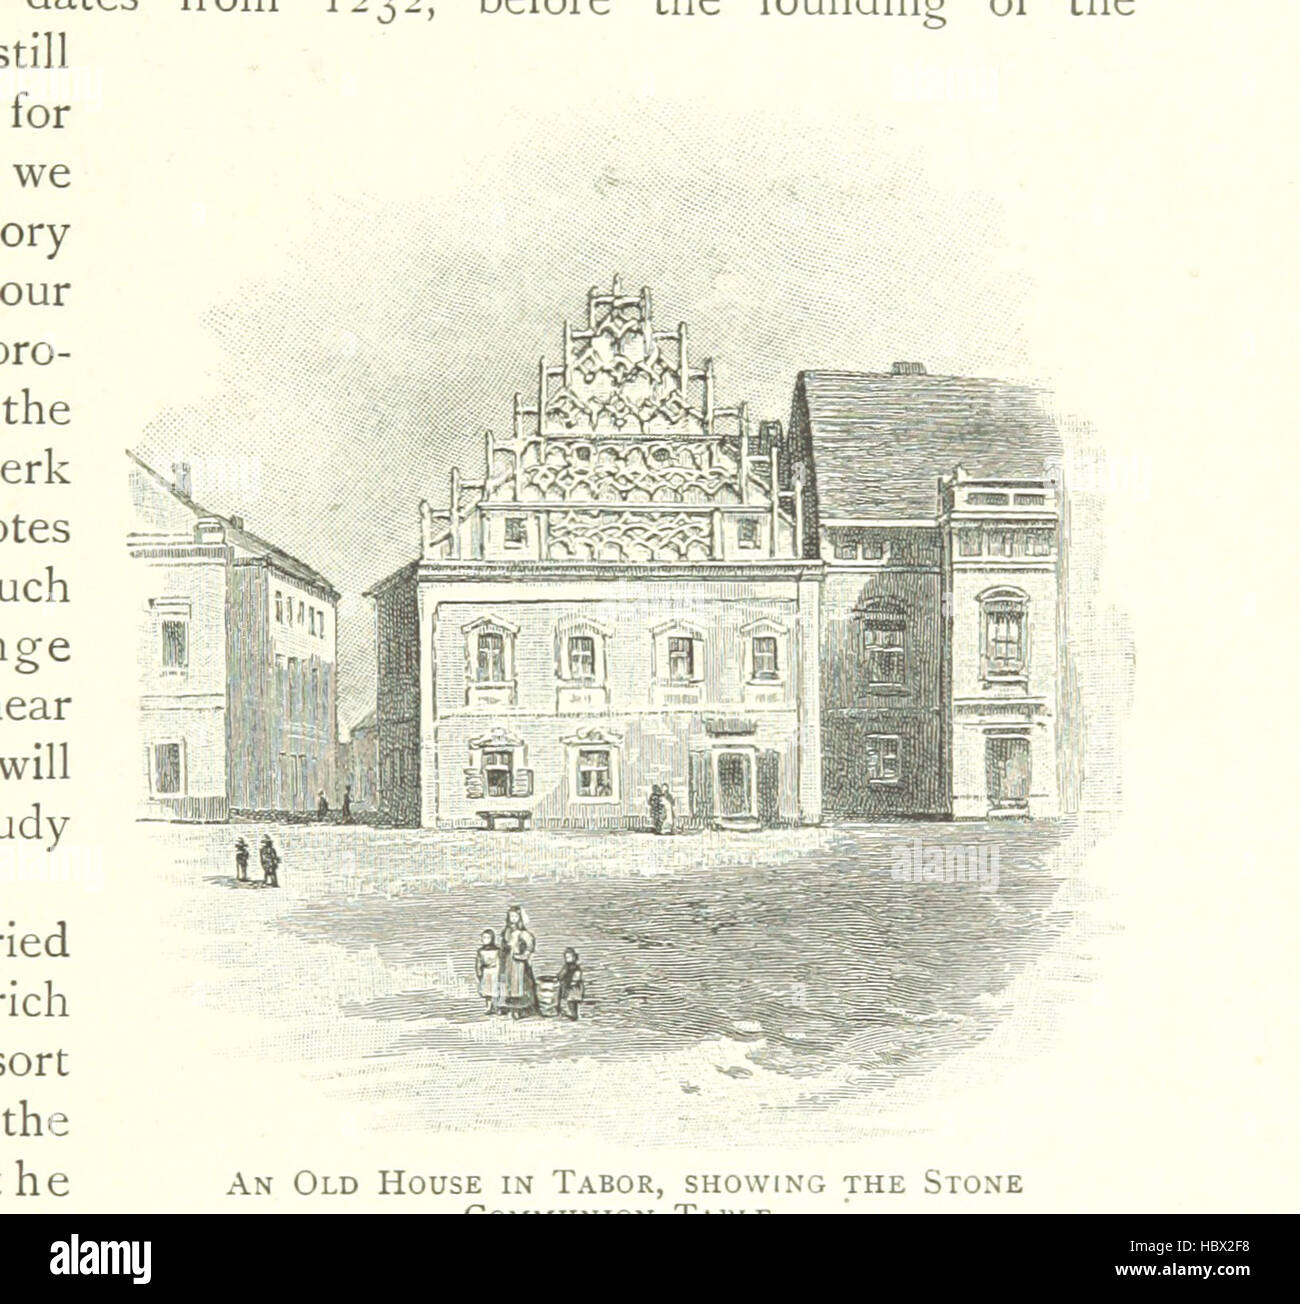 Image taken from page 125 of 'Pictures from Bohemia, drawn with pen and pencil, etc' Image taken from page 125 of 'Pictures from Bohemia, drawn Stock Photo